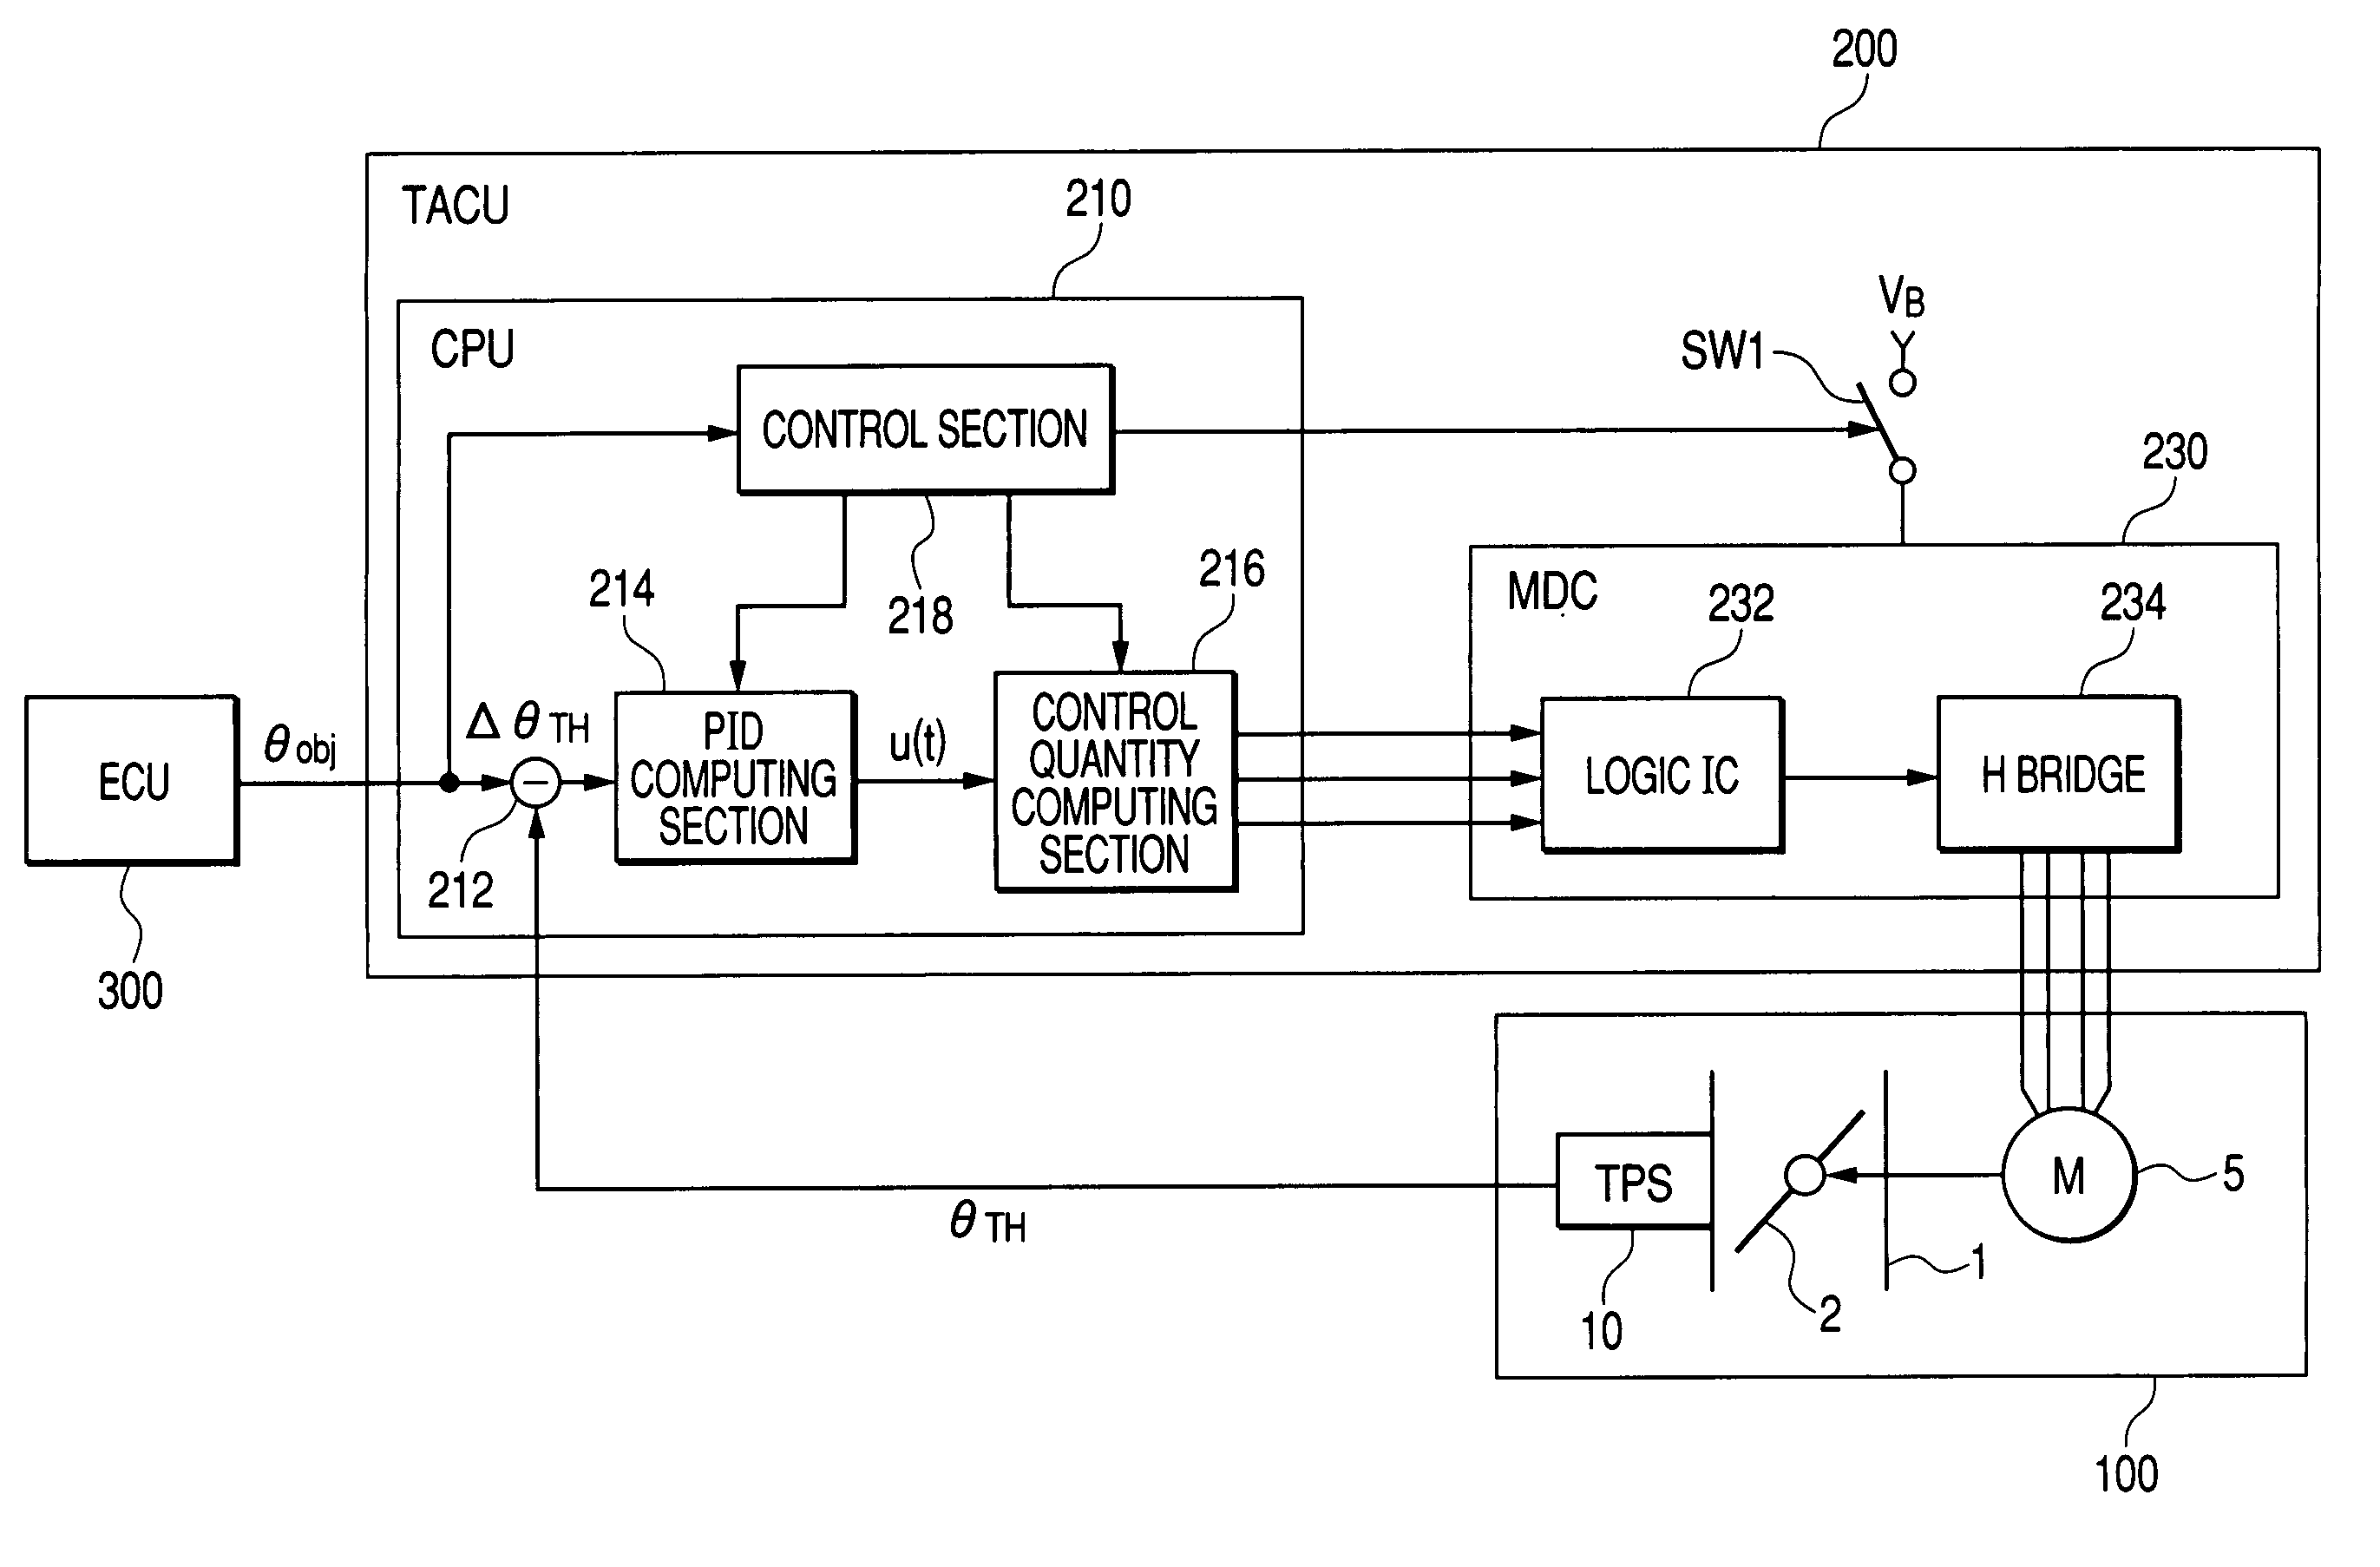 Electronically controlled throttle apparatus